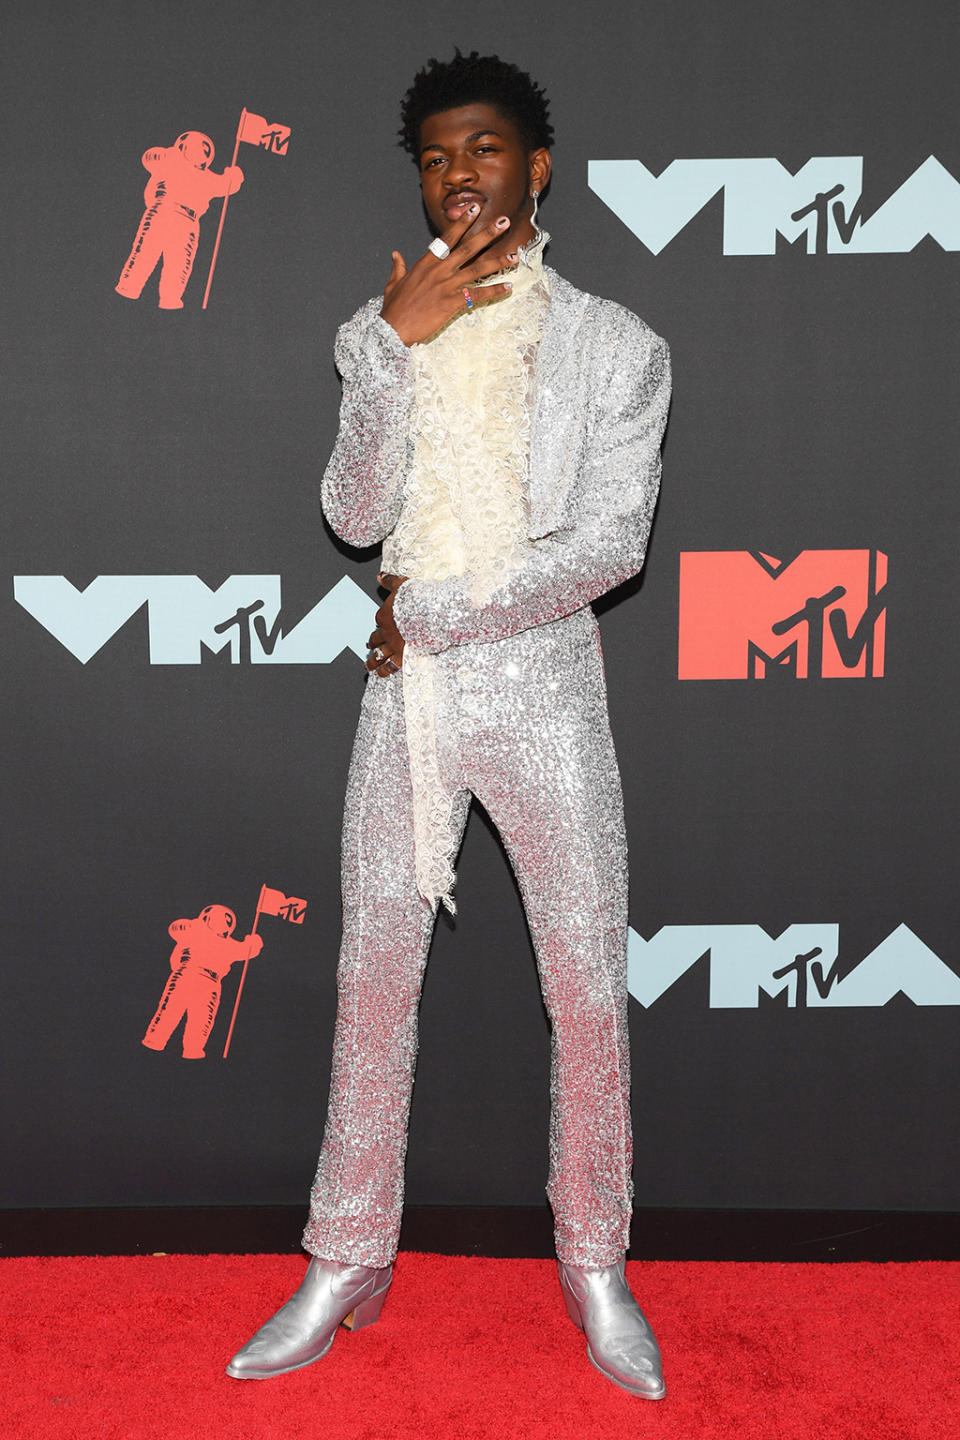 Lil Nas X wears a silver suit with cowboy boots at the MTV VMAs. - Credit: Andrew H. Walker/Shutterstock